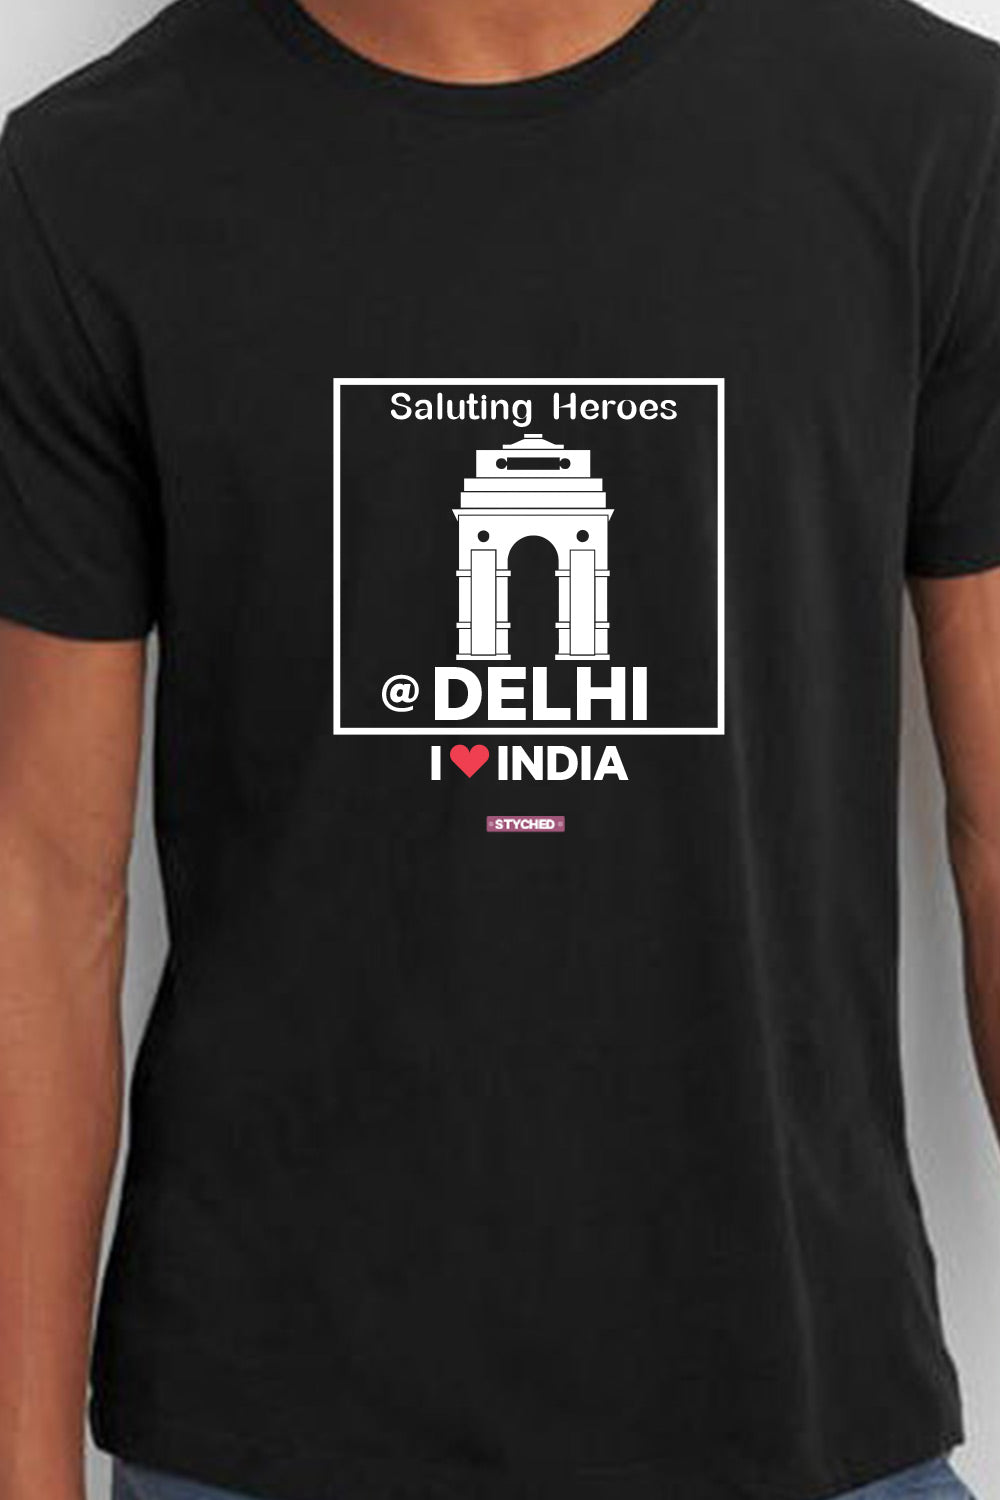 Delhi Saluting Our Heros - Styched in India Graphic T-Shirt Black Color